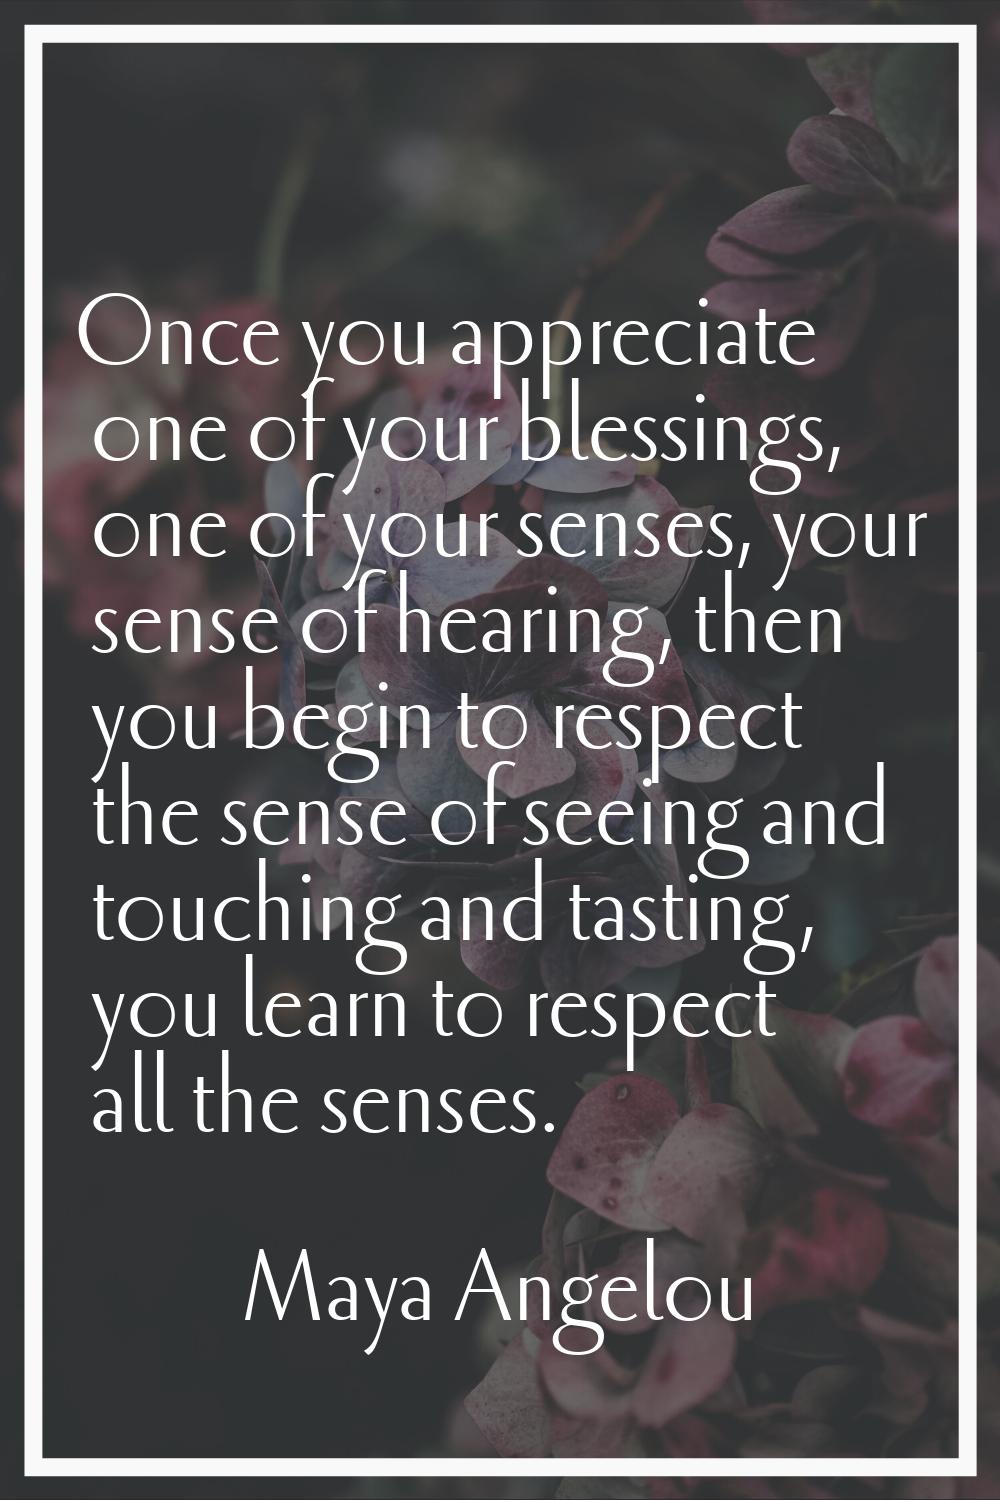 Once you appreciate one of your blessings, one of your senses, your sense of hearing, then you begi